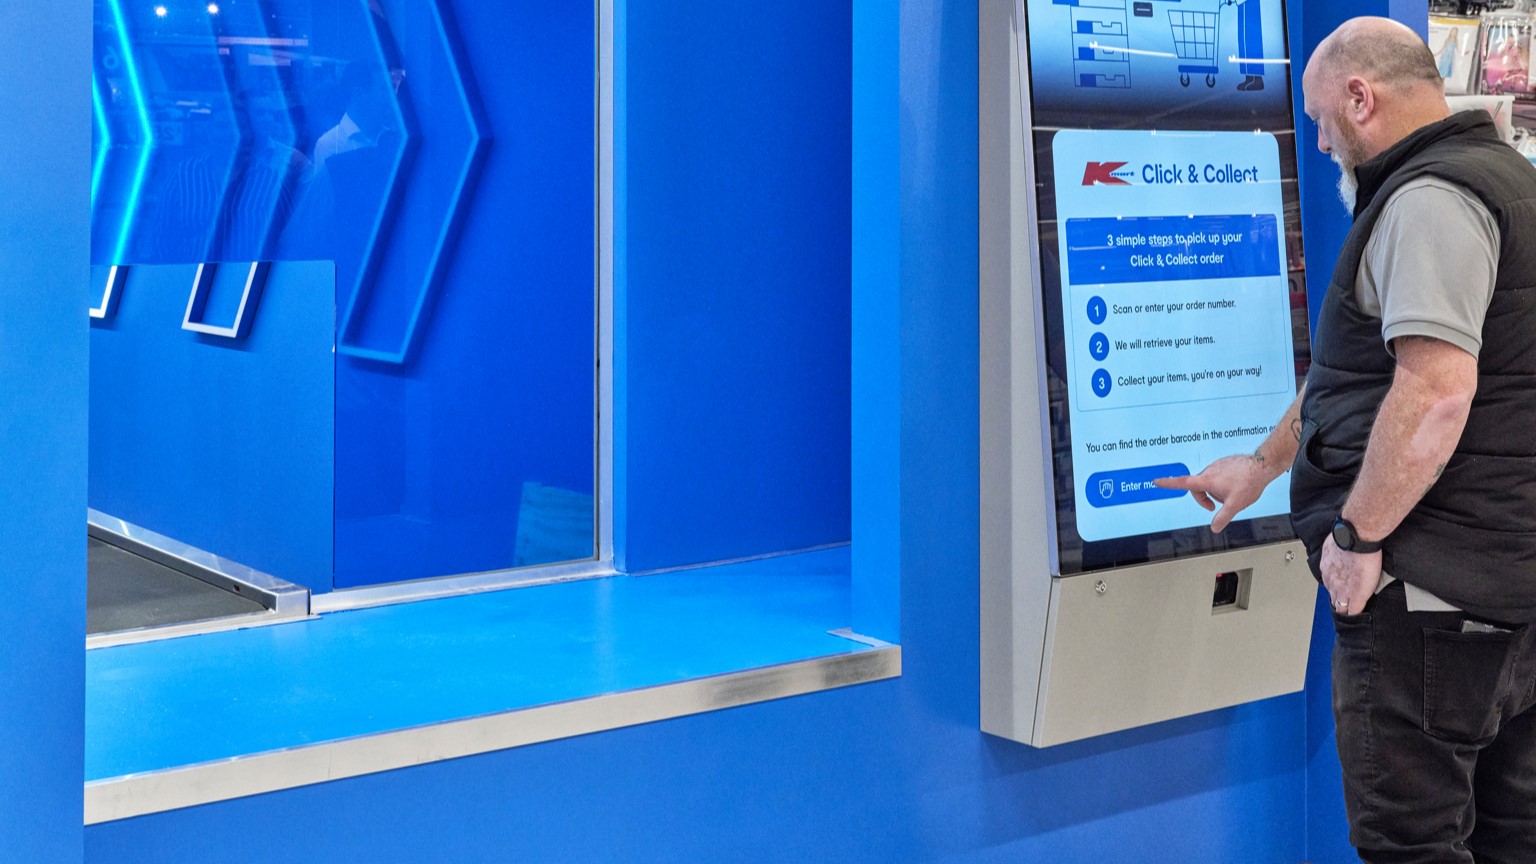 Kmart Australia trials 'click and collect' kiosk in store - Strategy -  iTnews